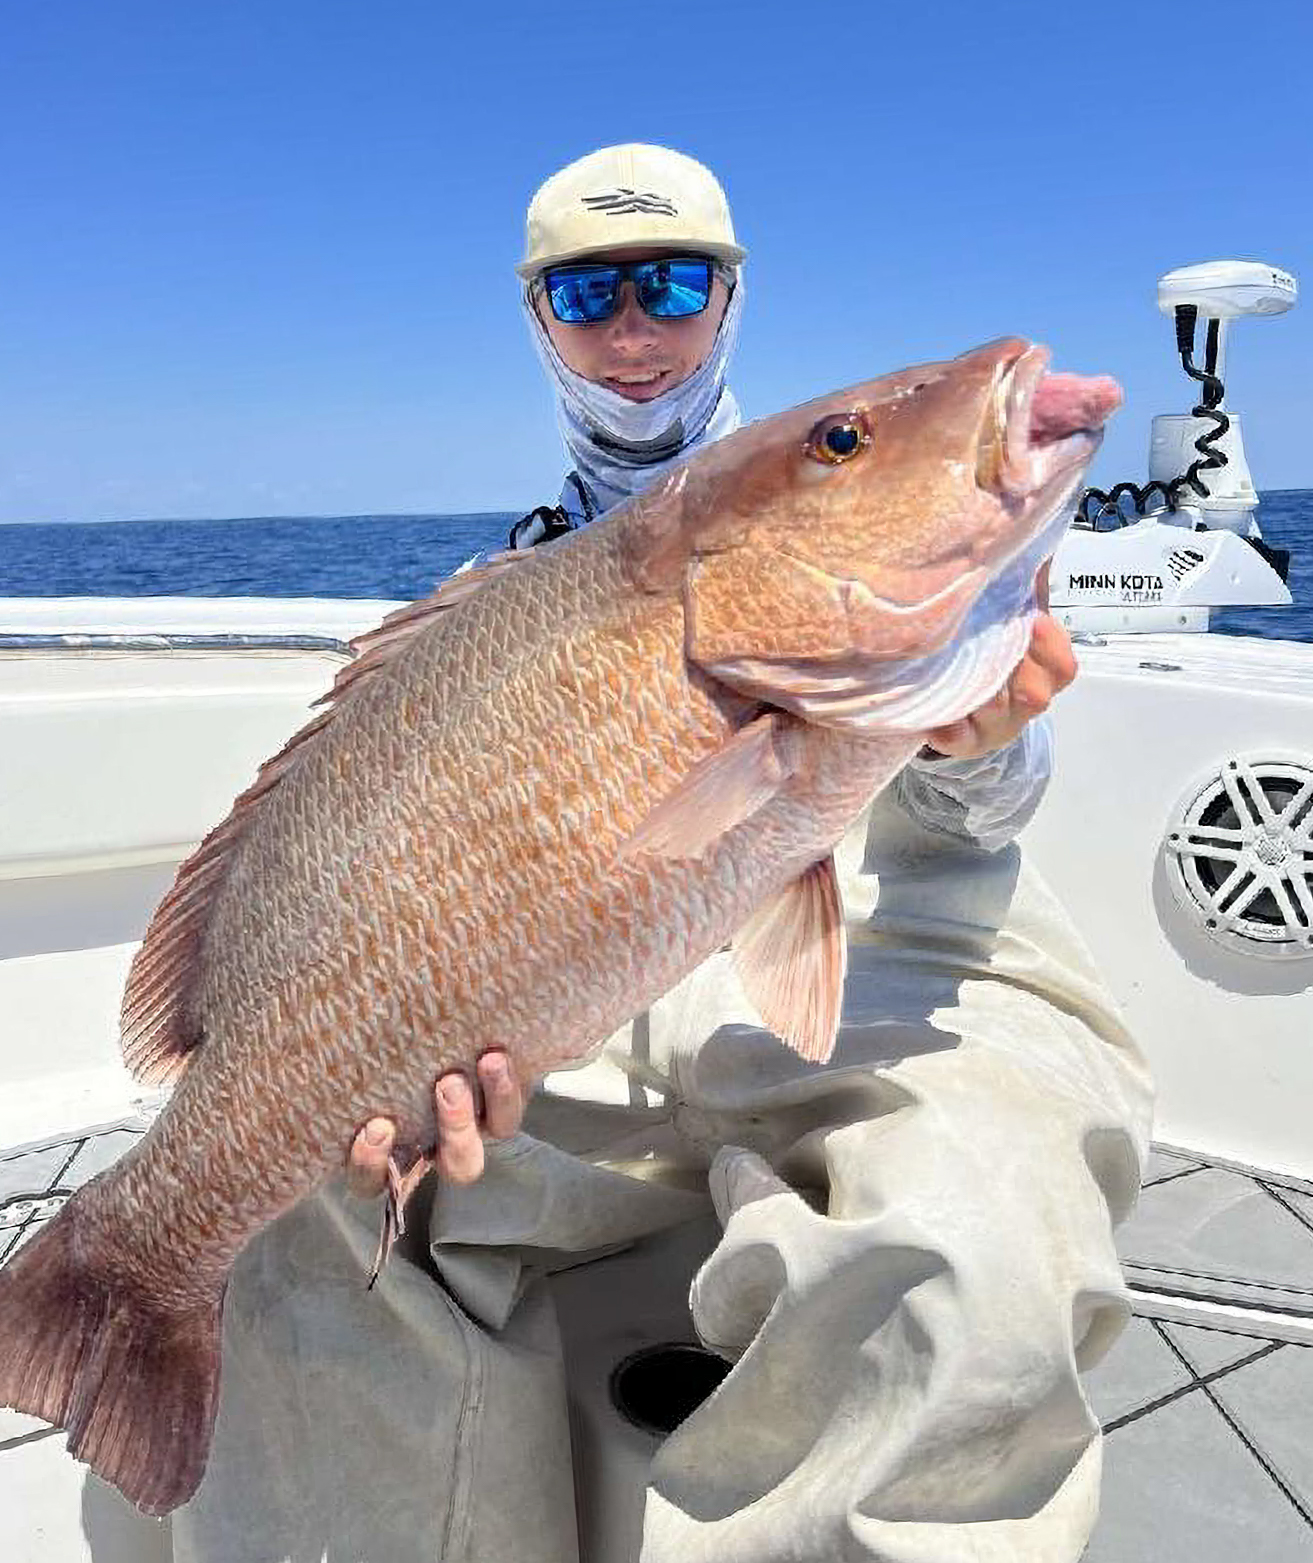 An angler in a hat and sunglasses holds up a fat snapper.